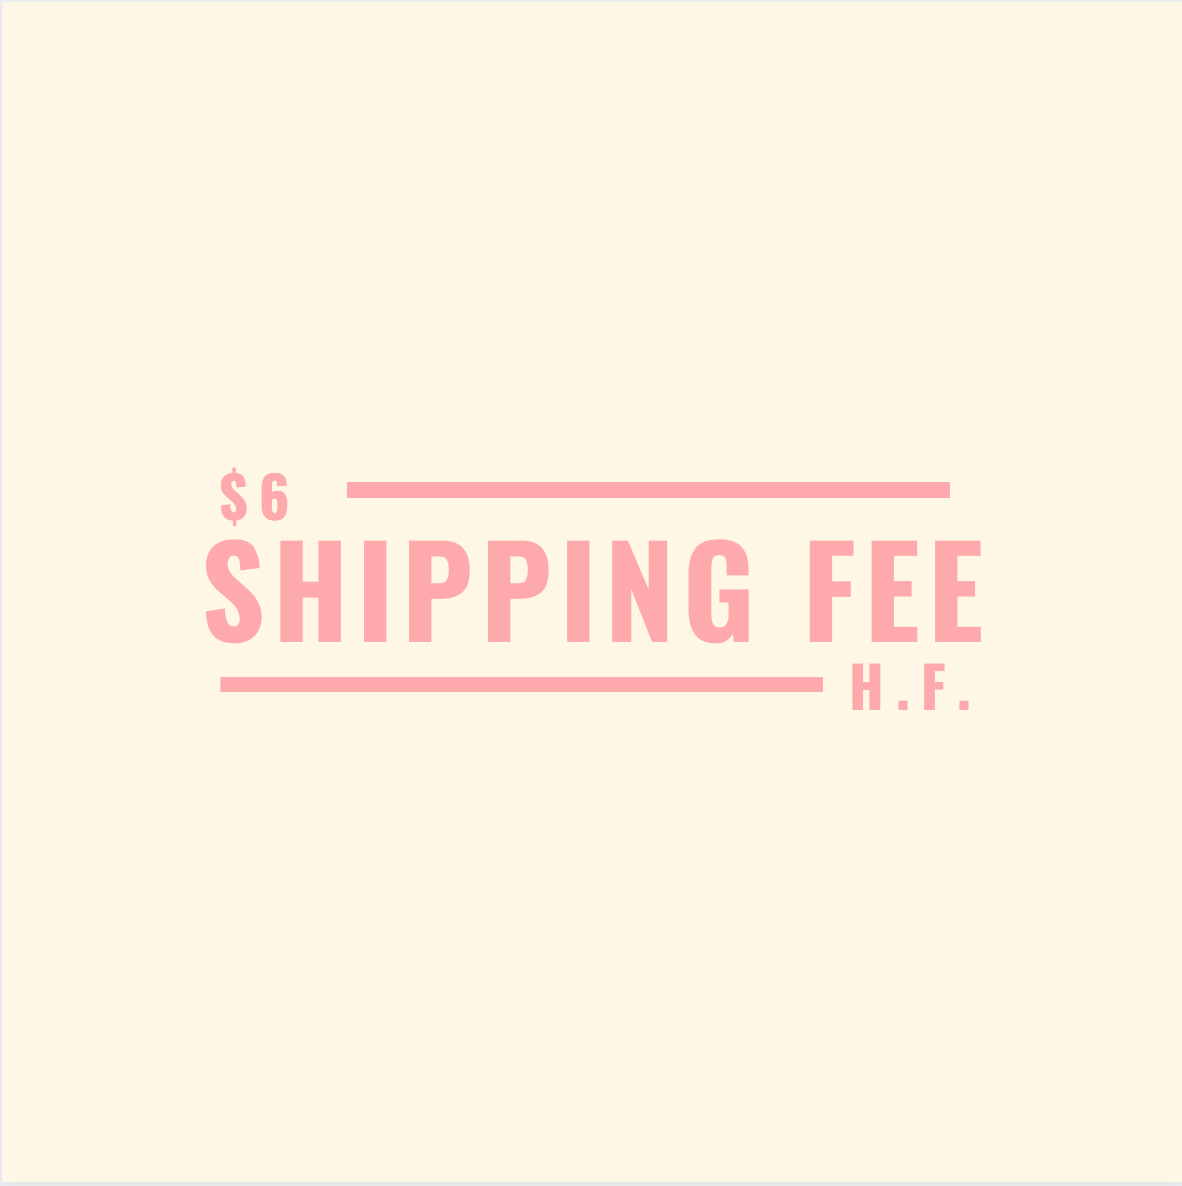 SHIPPING FEE FOR PREVIOUS ORDER